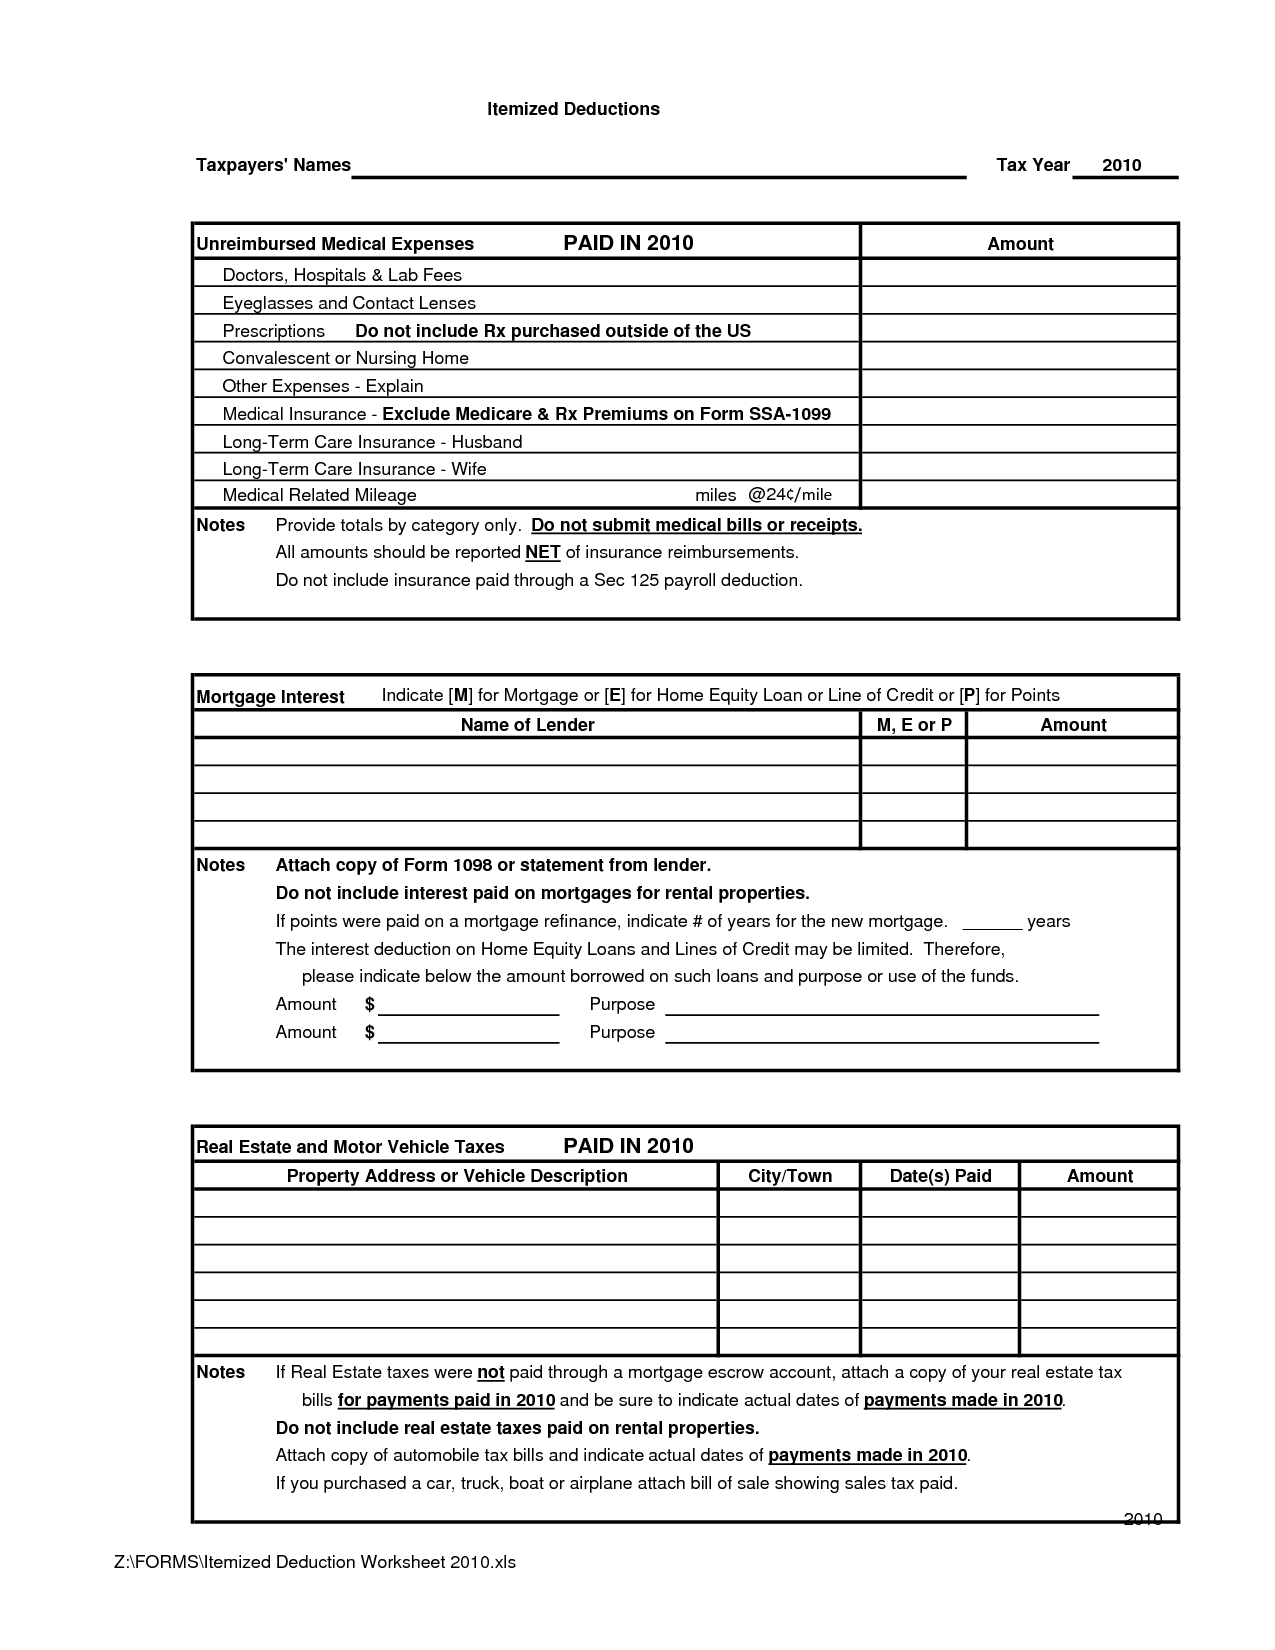 18 Best Images of Itemized Deductions Worksheet Printable  Itemized Deductions Worksheet, 2014 